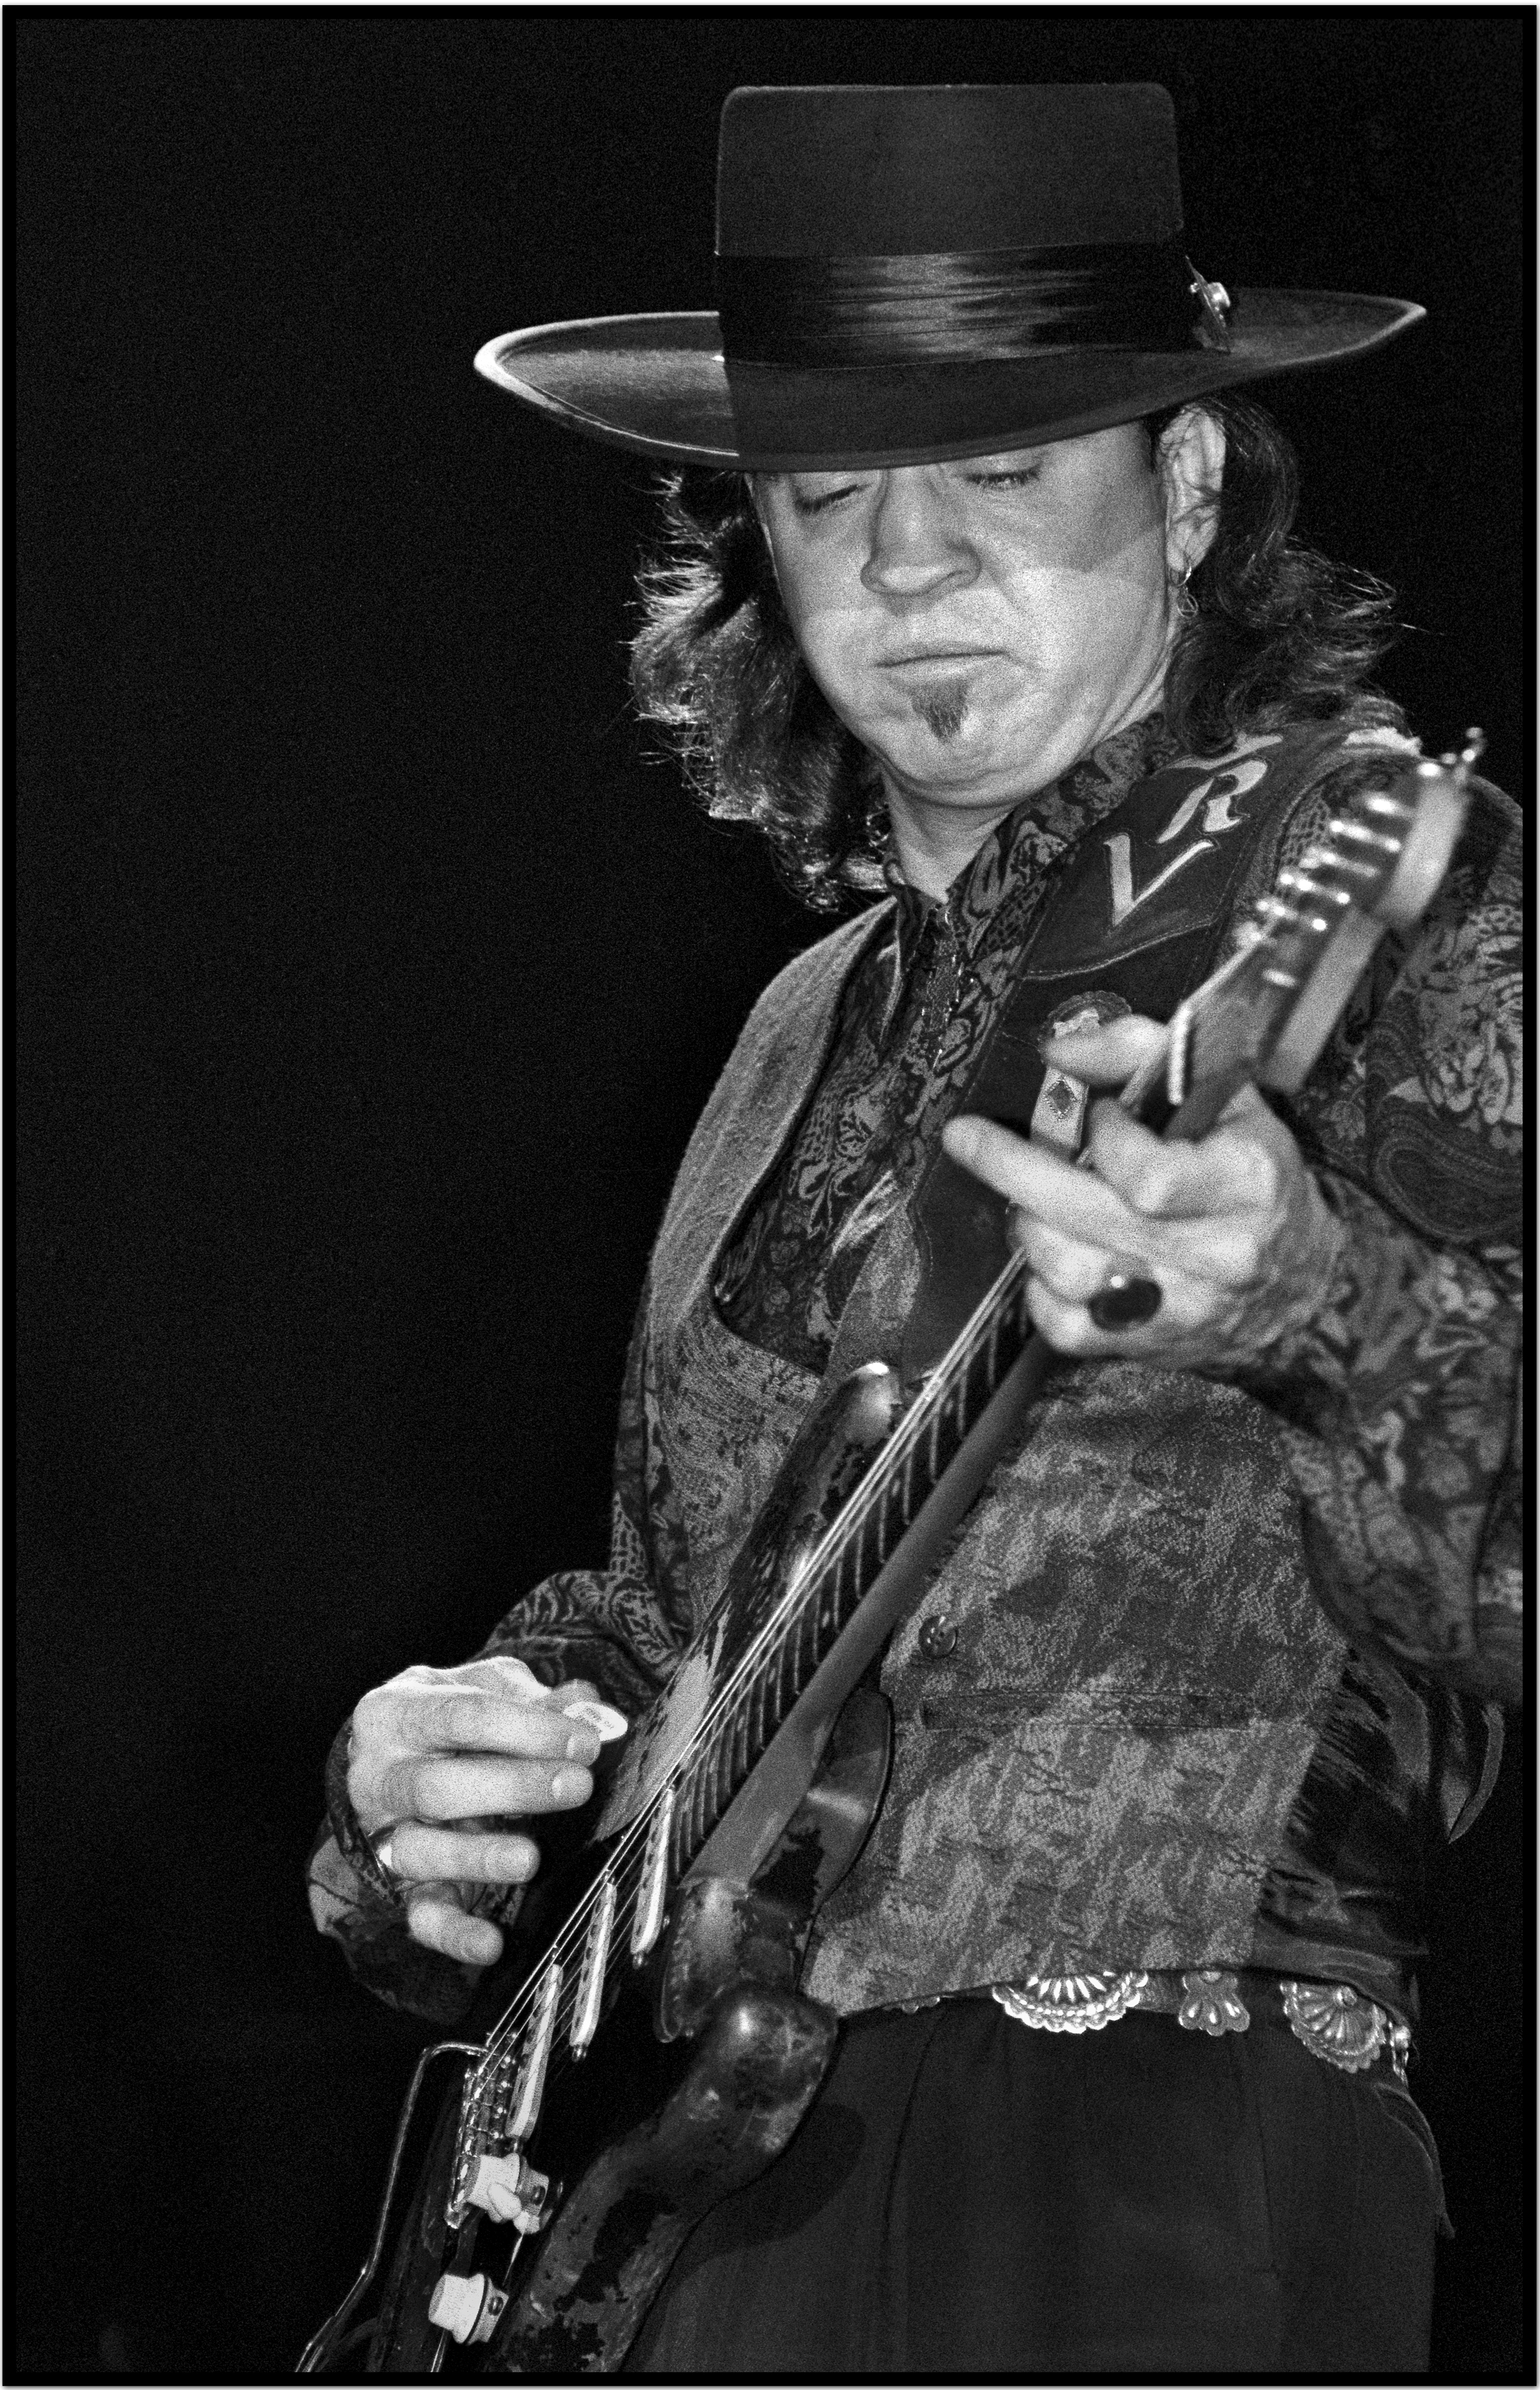 Stevie Ray Vaughan wallpapers, Music, HQ Stevie Ray Vaughan pictures